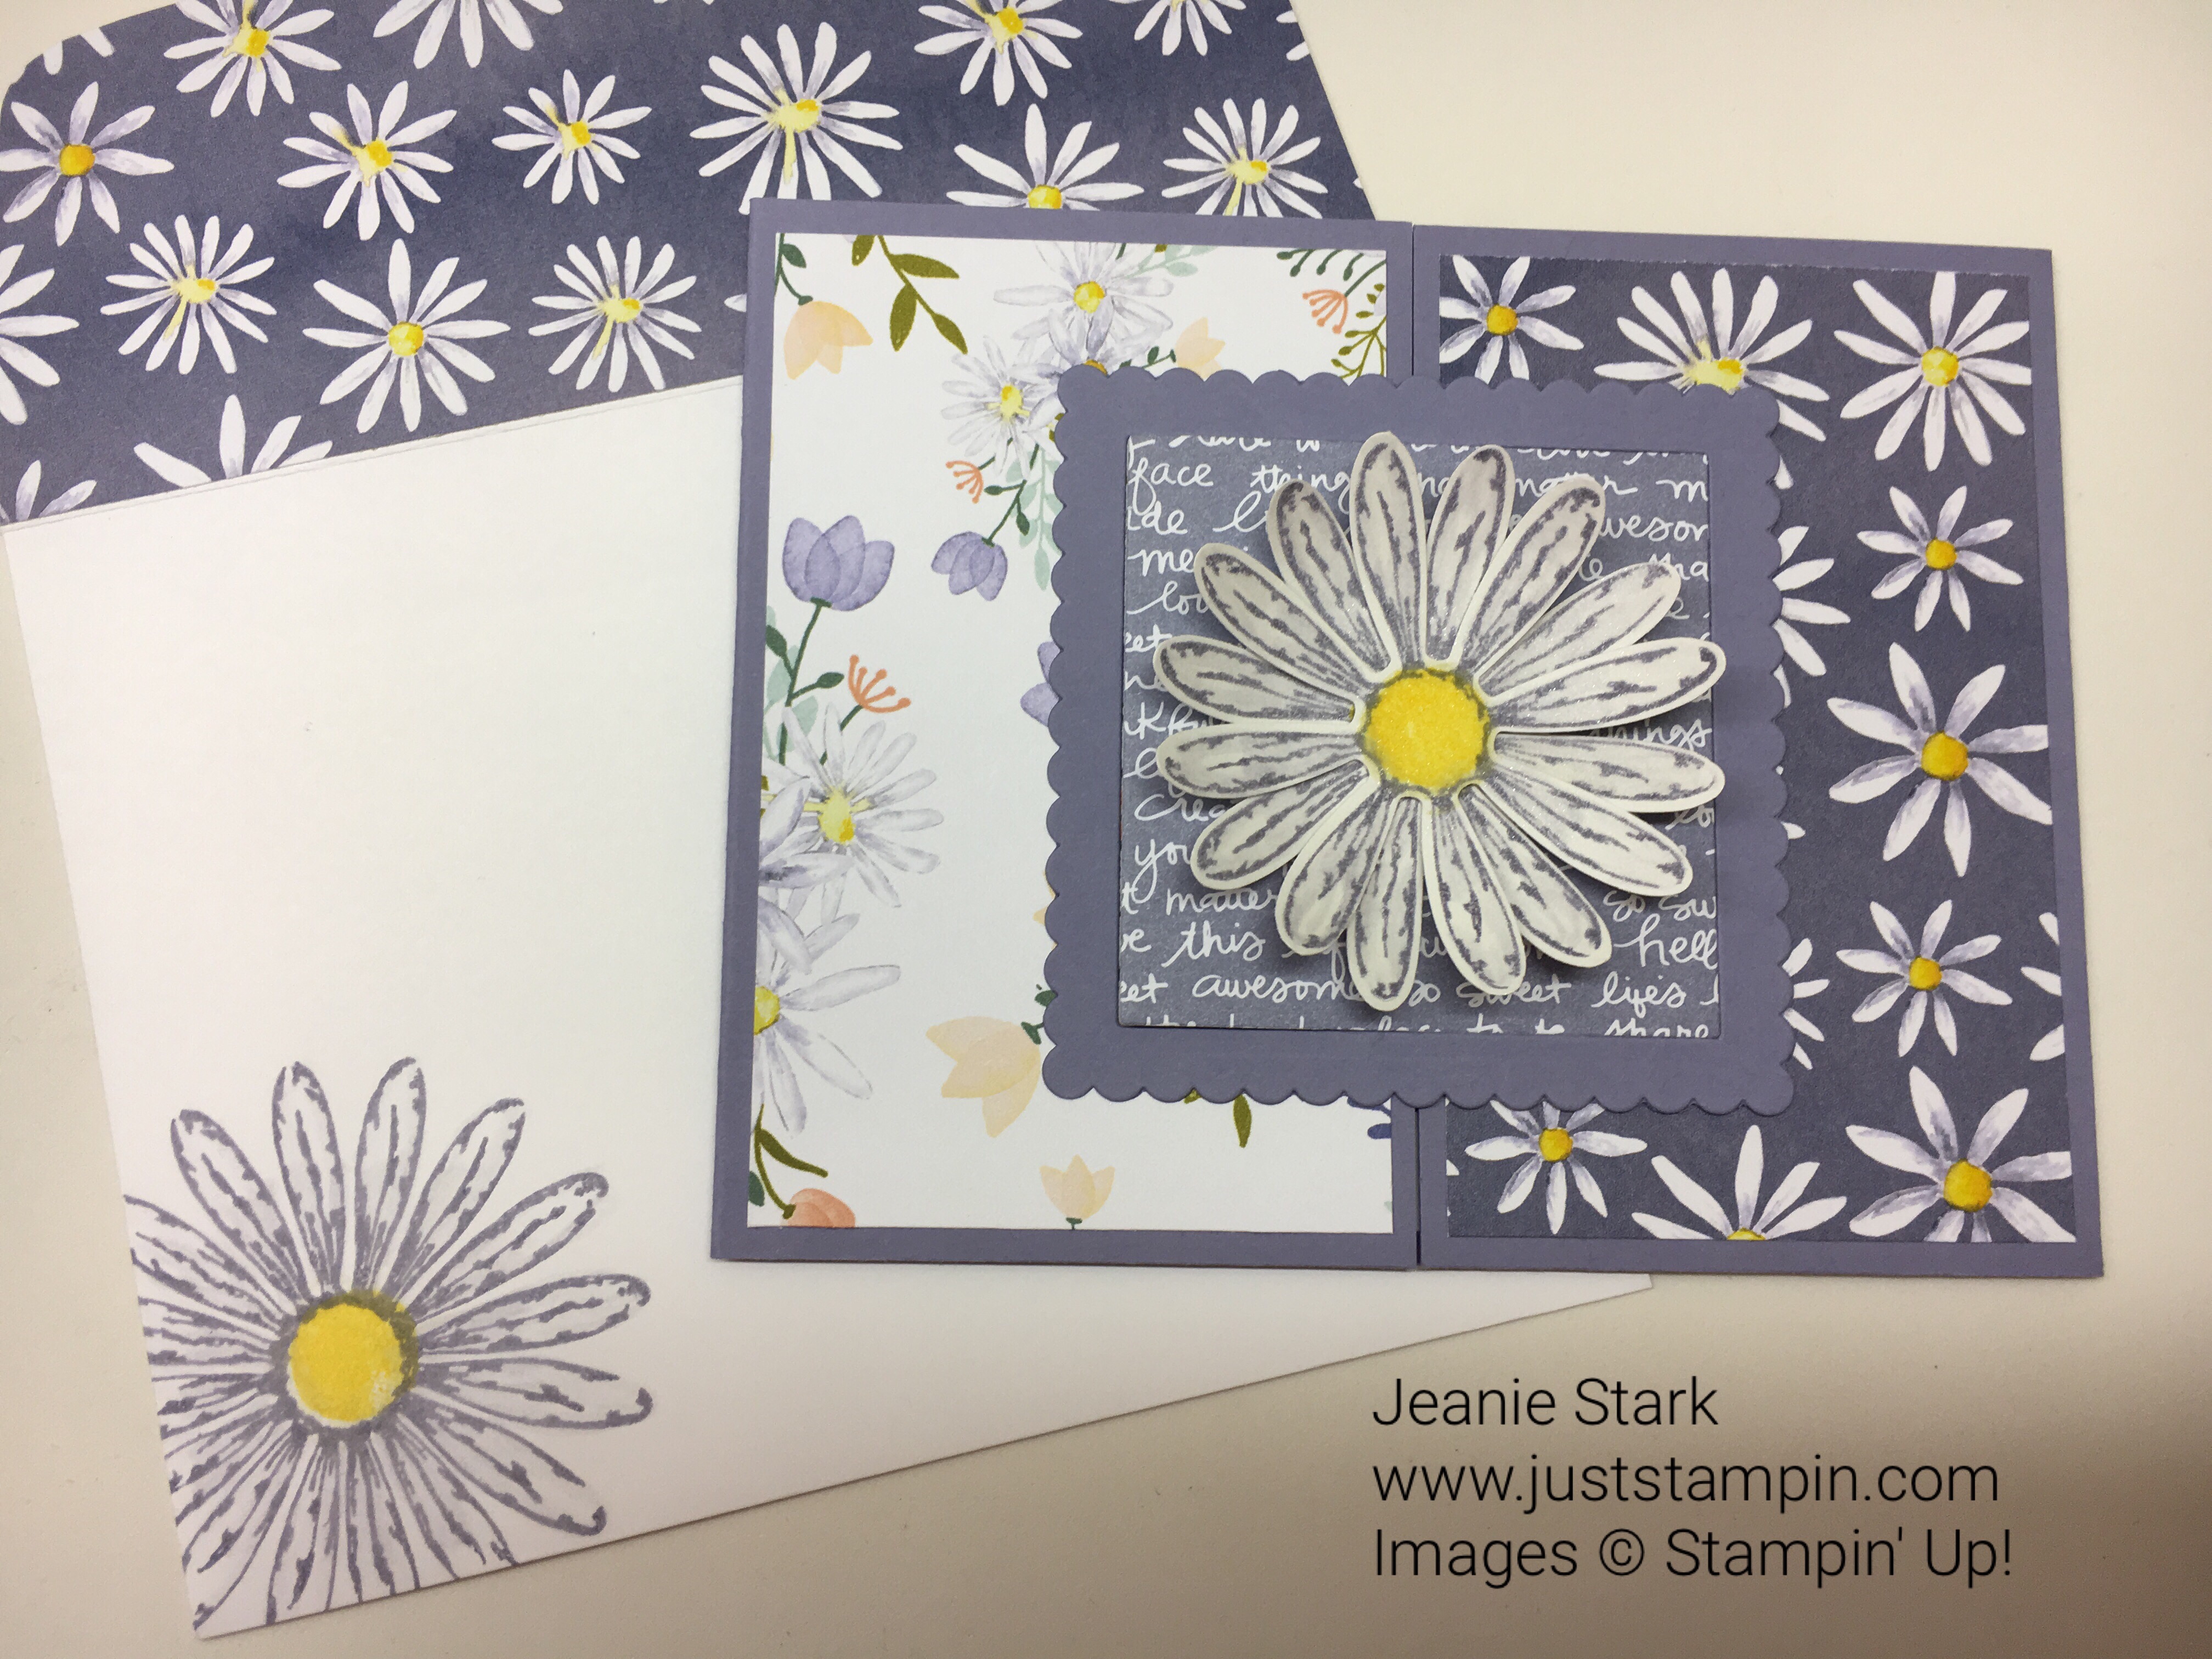 Stampin up fun fold card idea using Daisy Delight stamp set and Delightful Daisy Designer Series Paper -Jeanie Stark StampinUp